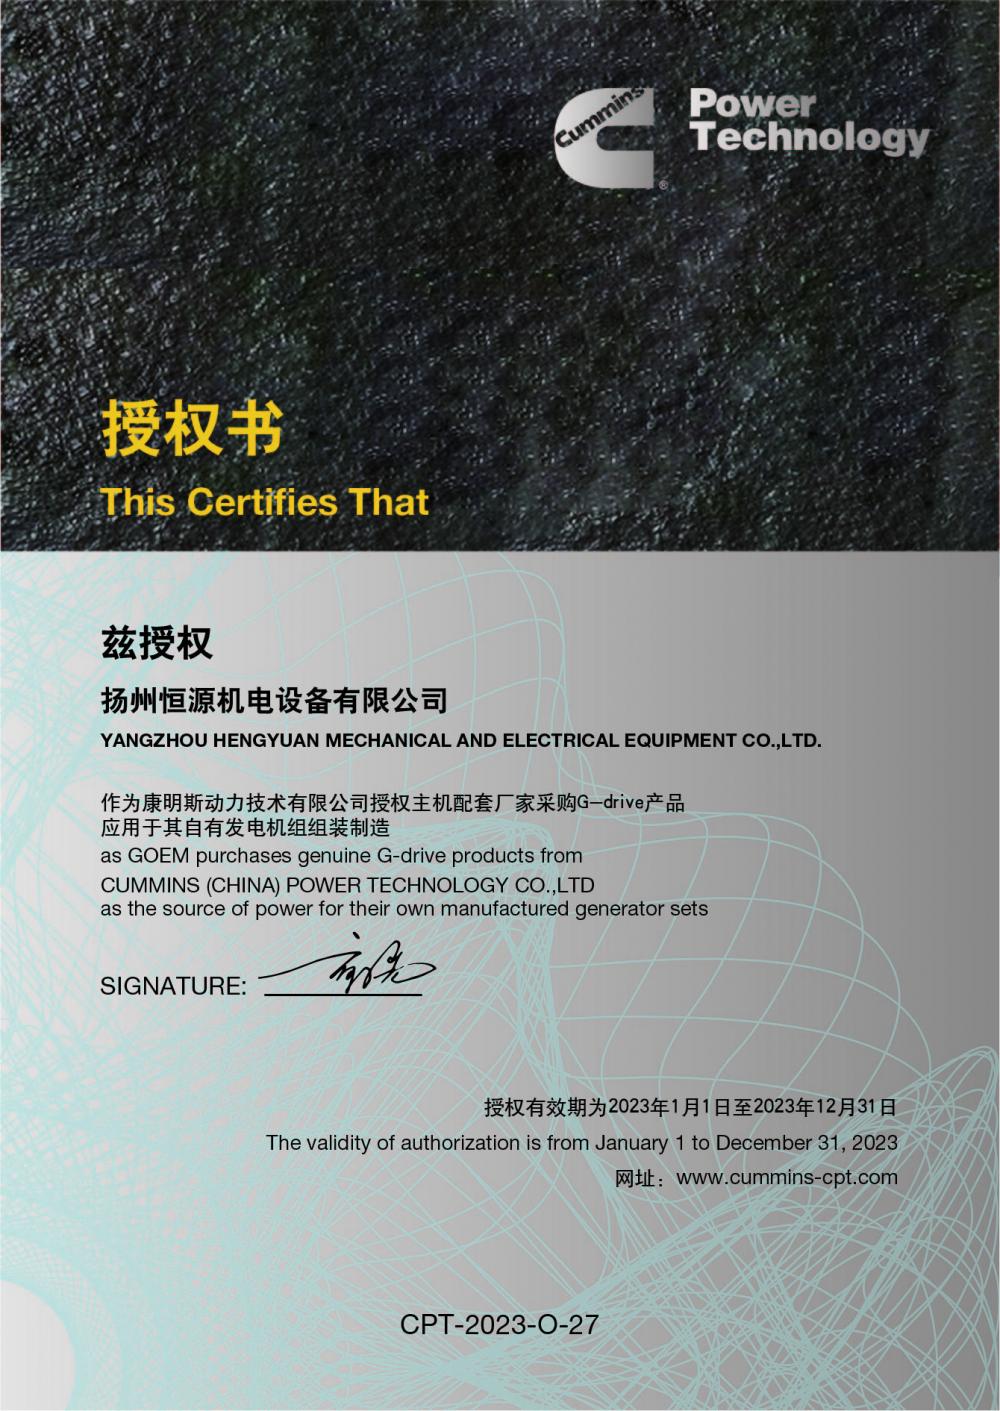 certificate of authorization